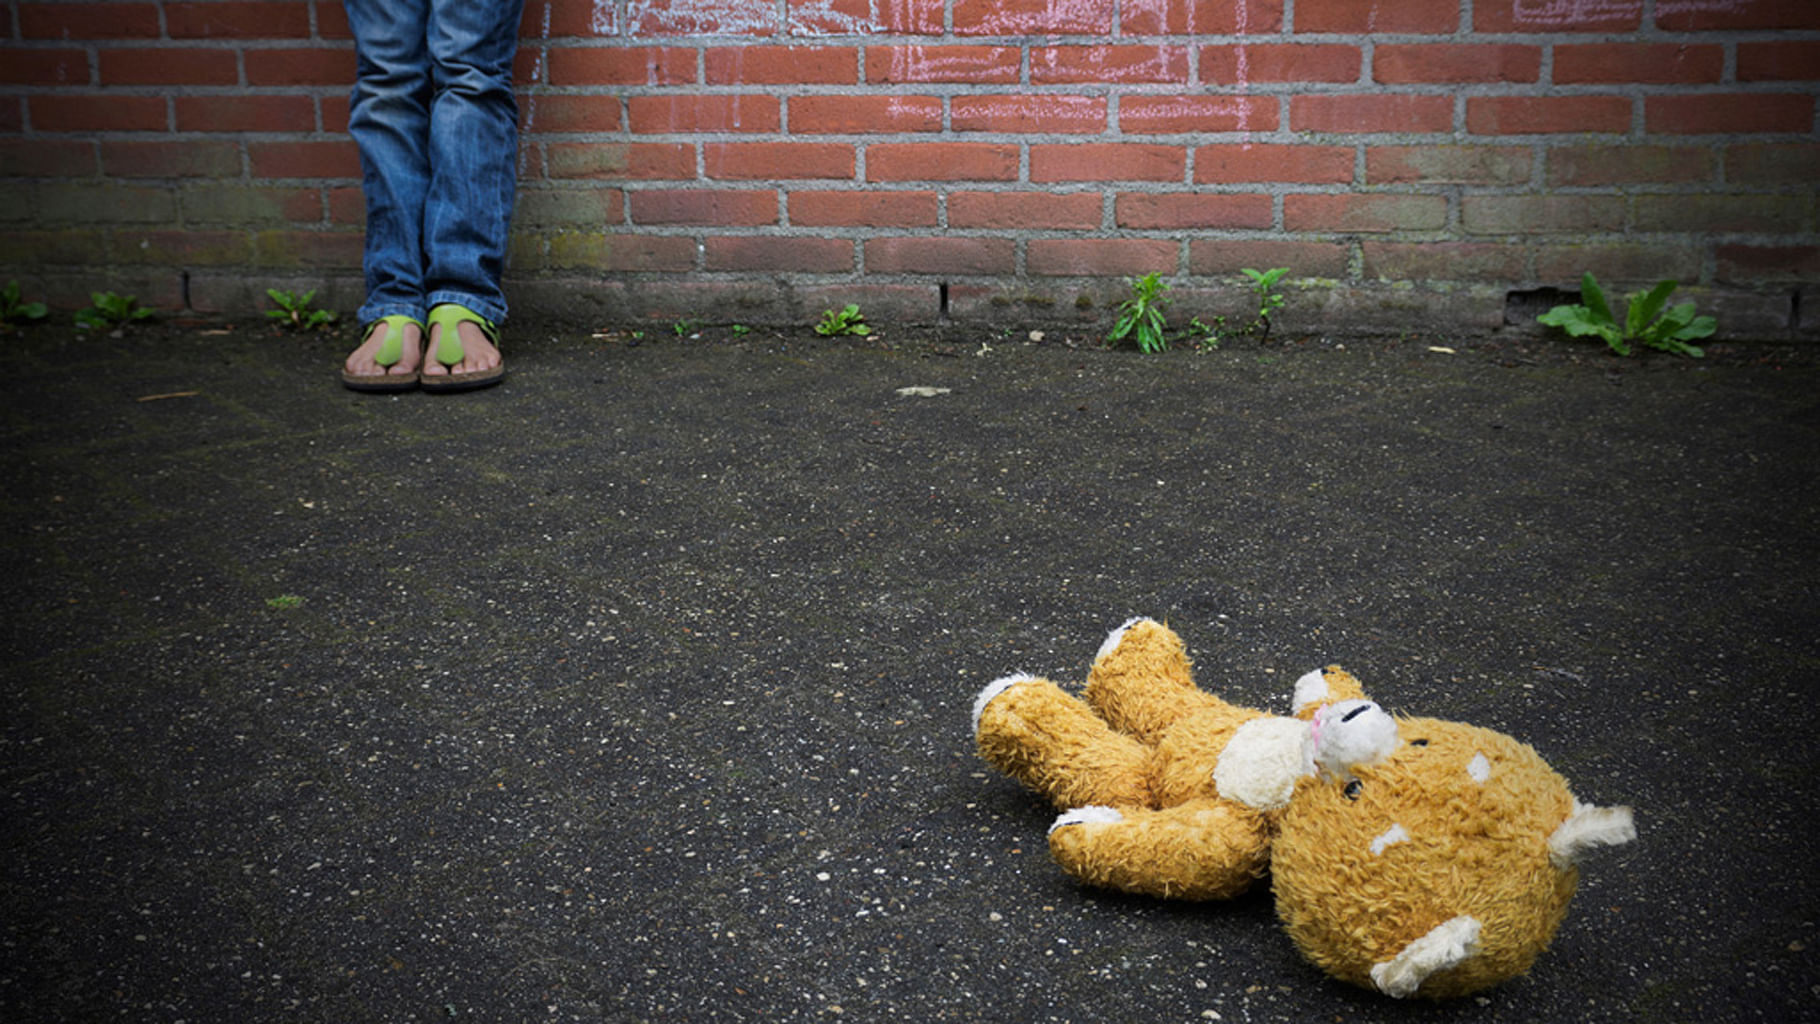 

The molester is often known to the child victim. (Photo: iStock)